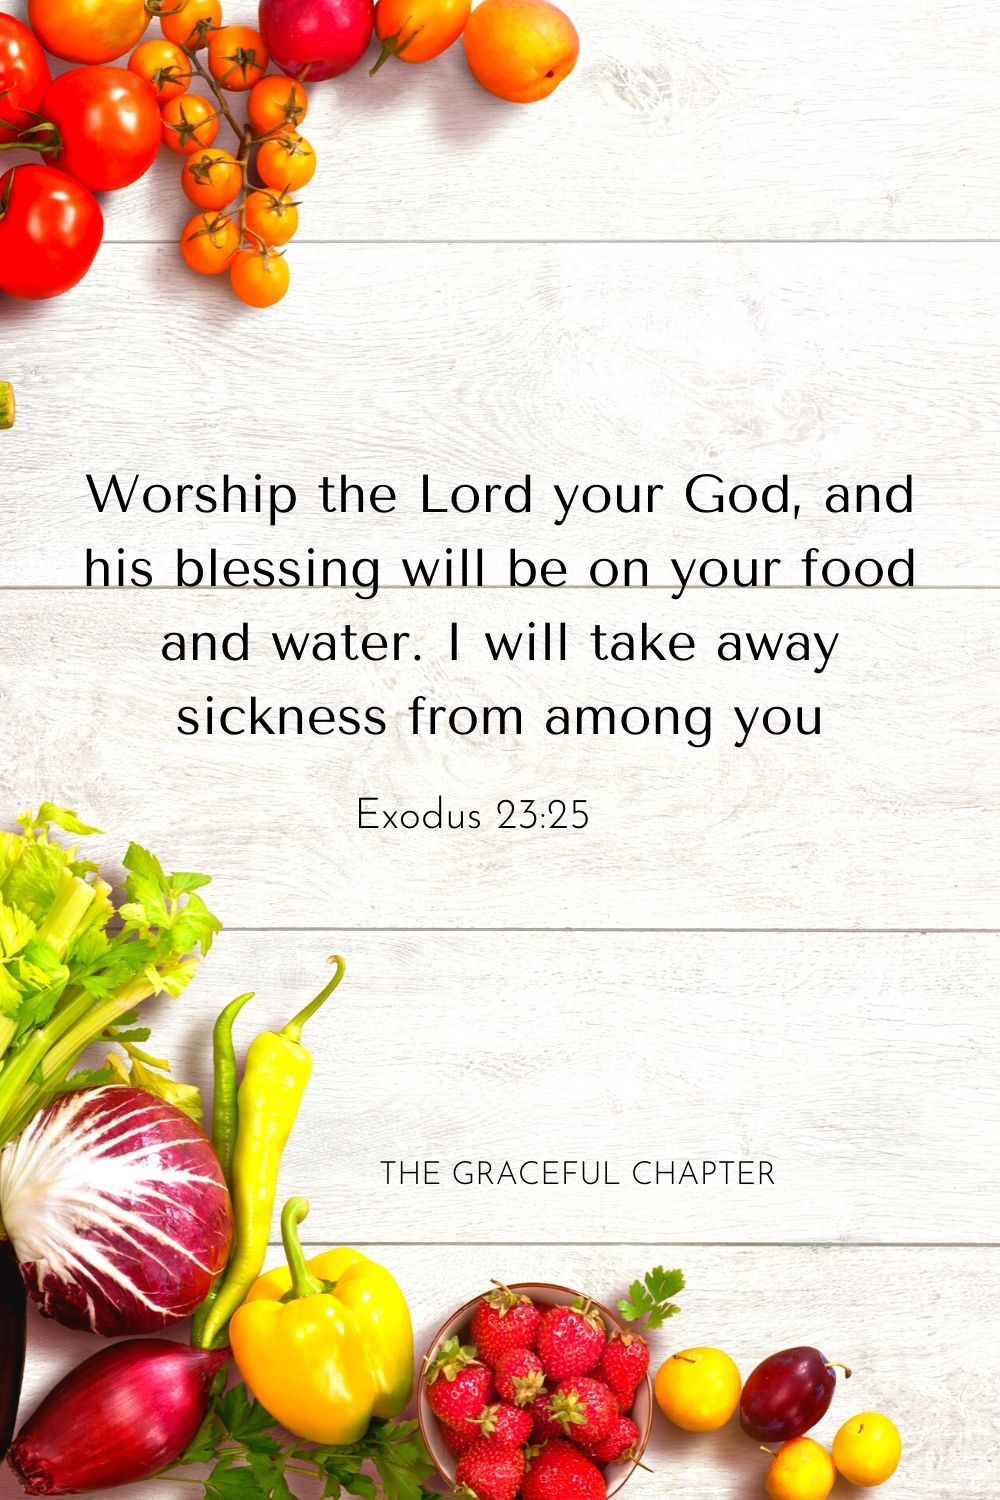 Worship the Lord your God, and his blessing will be on your food and water. I will take away sickness from among you, Exodus 23:25